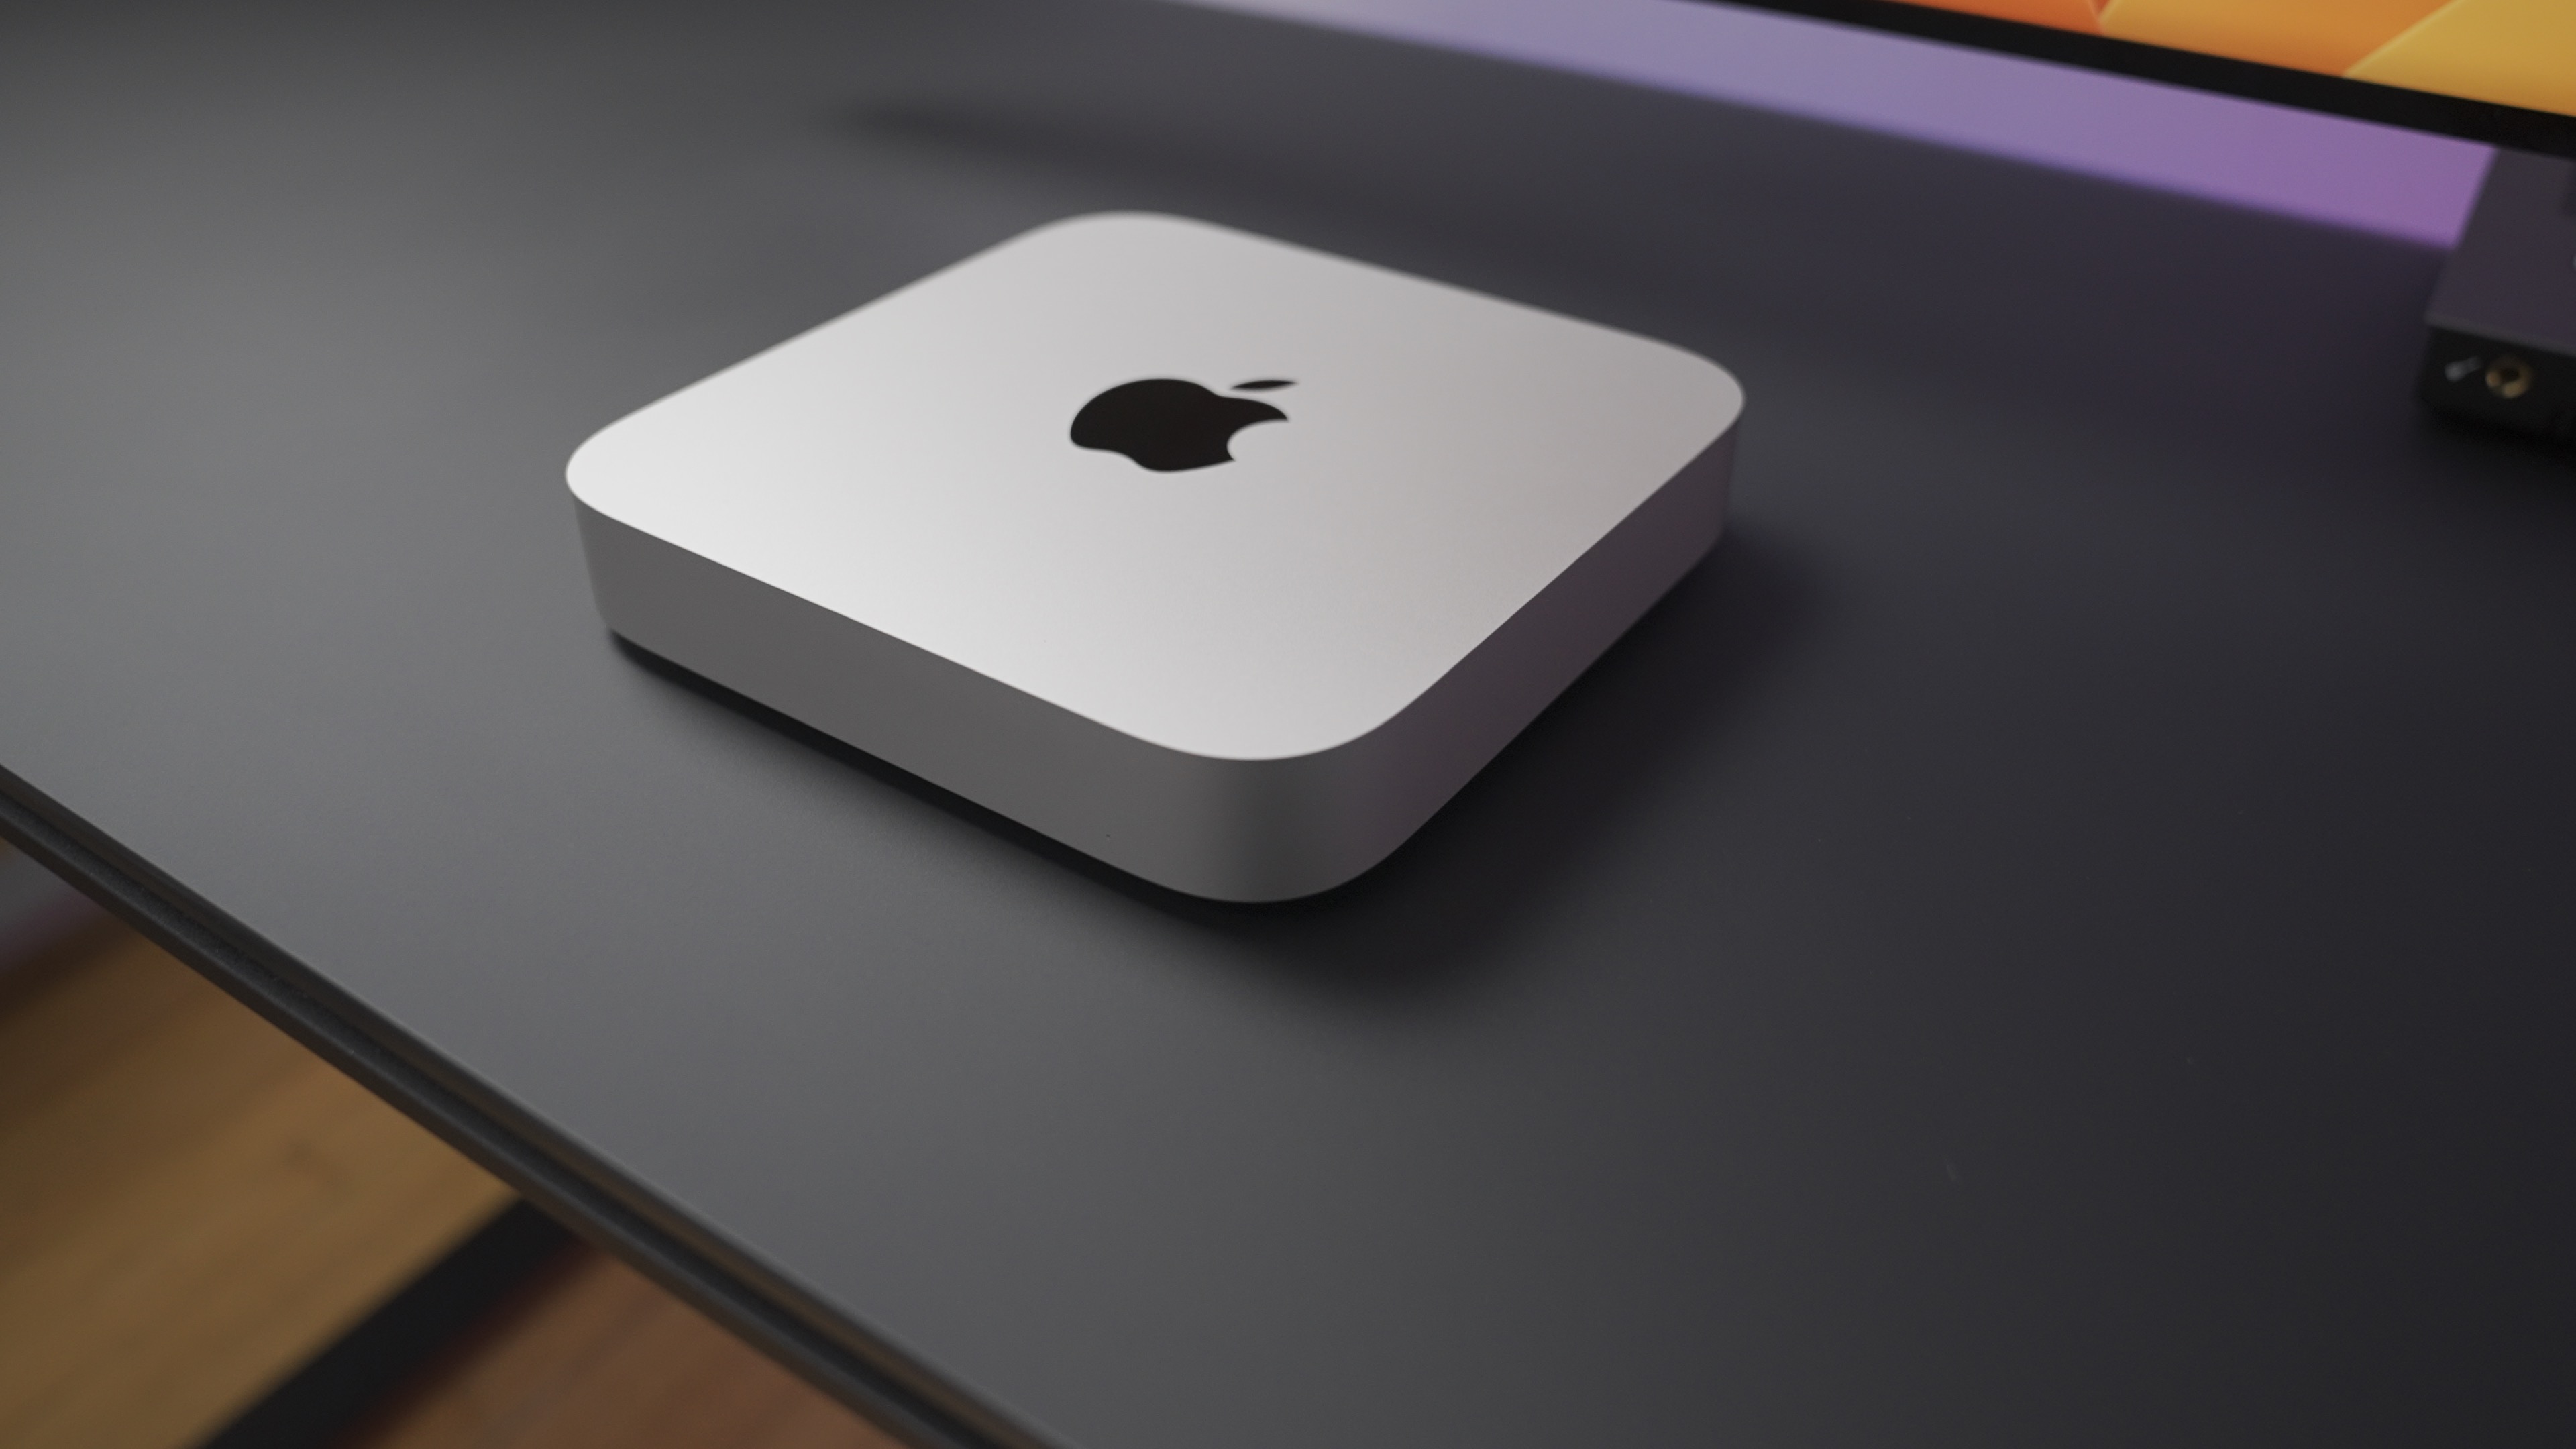 Apple's Mac Mini M2 falls back to an all-time low of $500